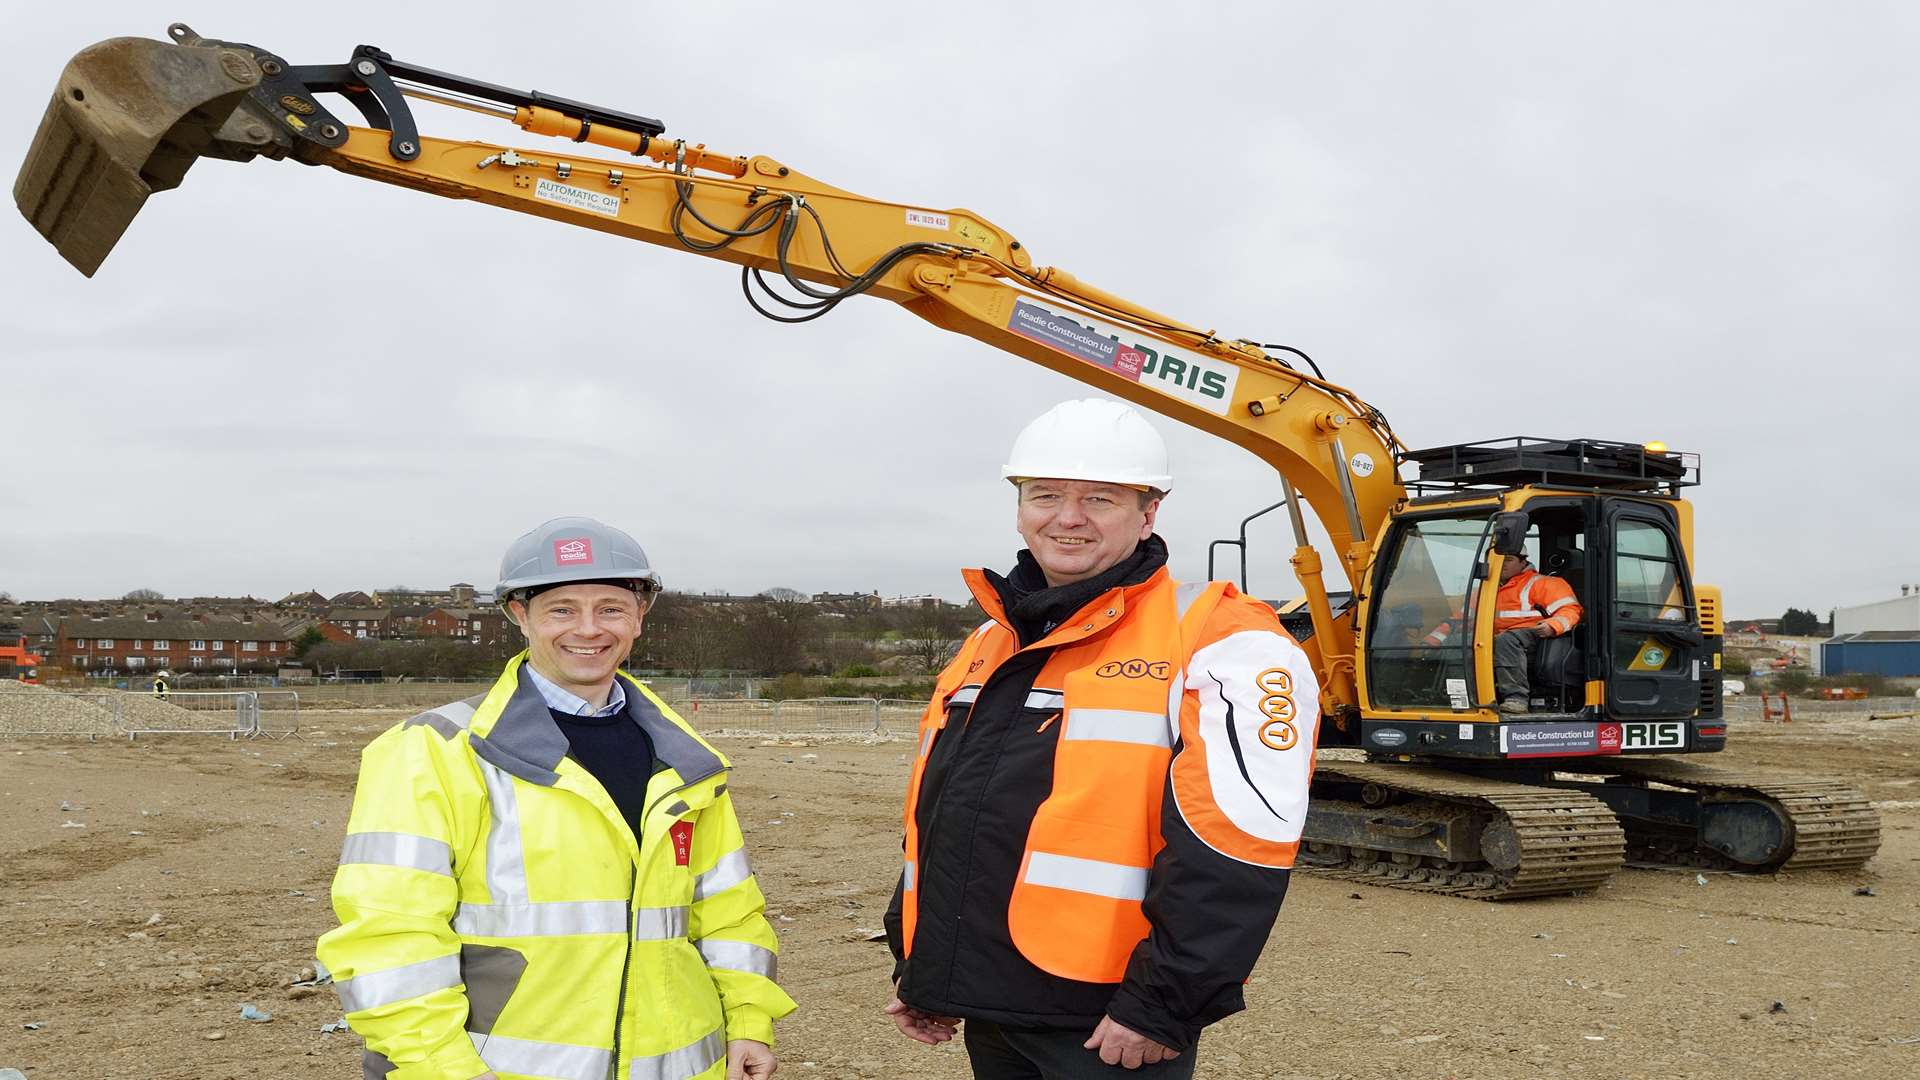 From left, Exton Estates director James Mawson and TNT UK international network and operations director Steve Meadows at the South East hub site in Dartford